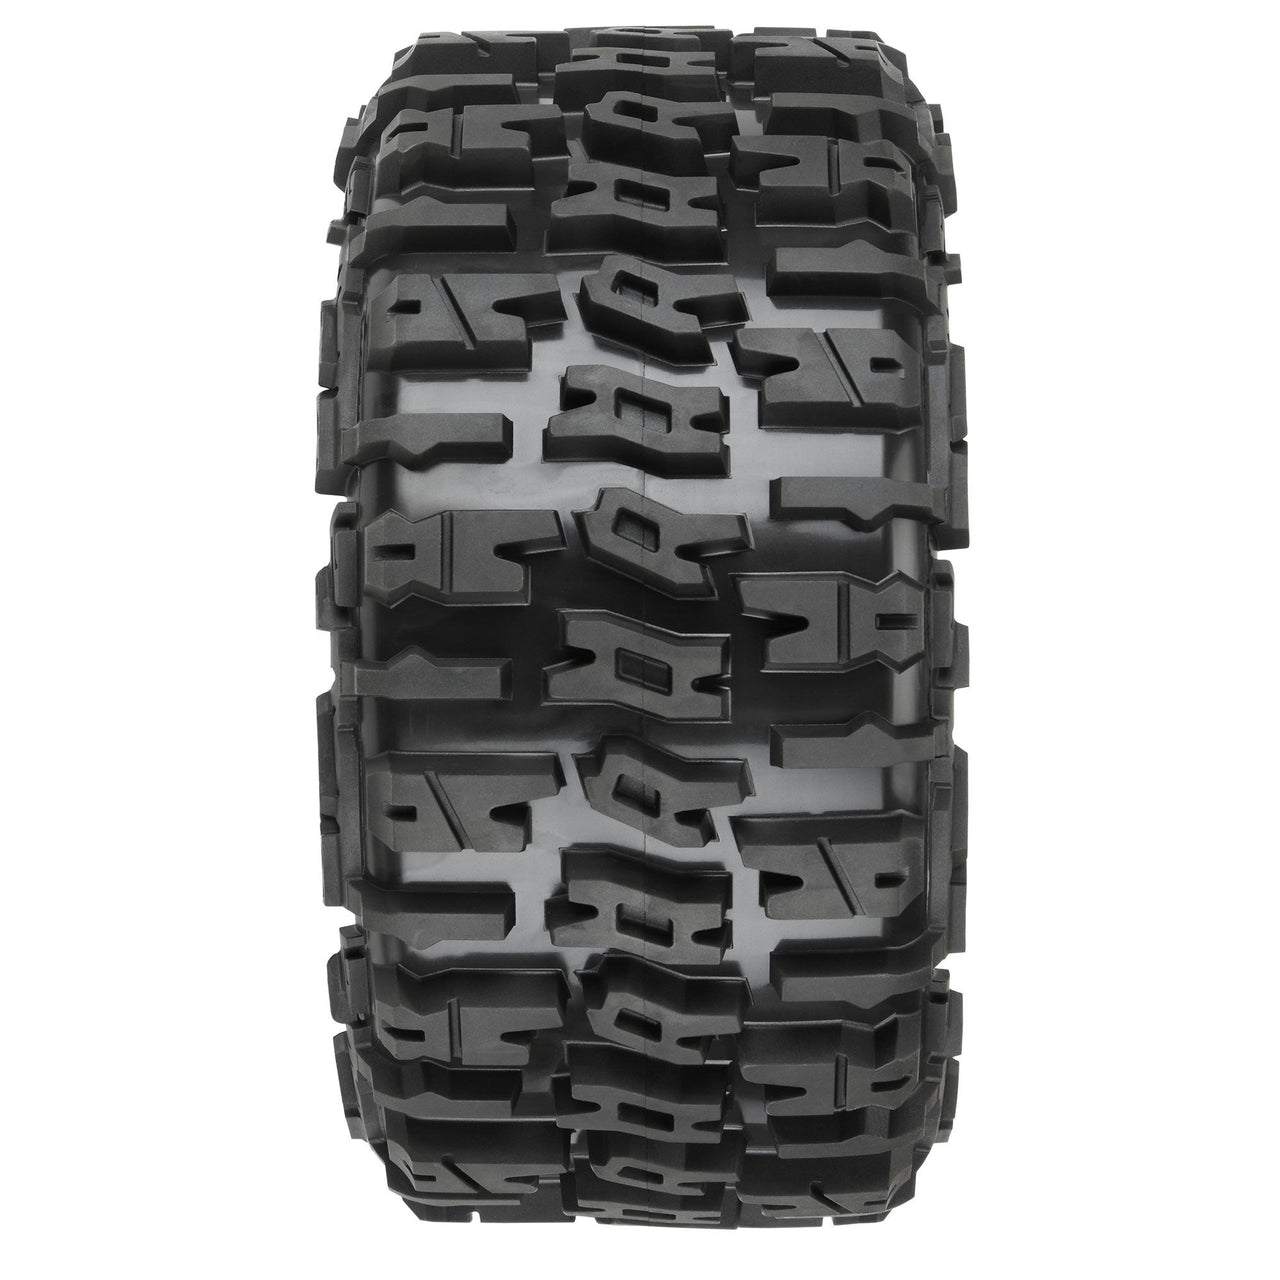 PRO1024010 1/6 Trencher F/R 5.7” Tires Mounted 24mm Black Raid 8x48 Hex (2)